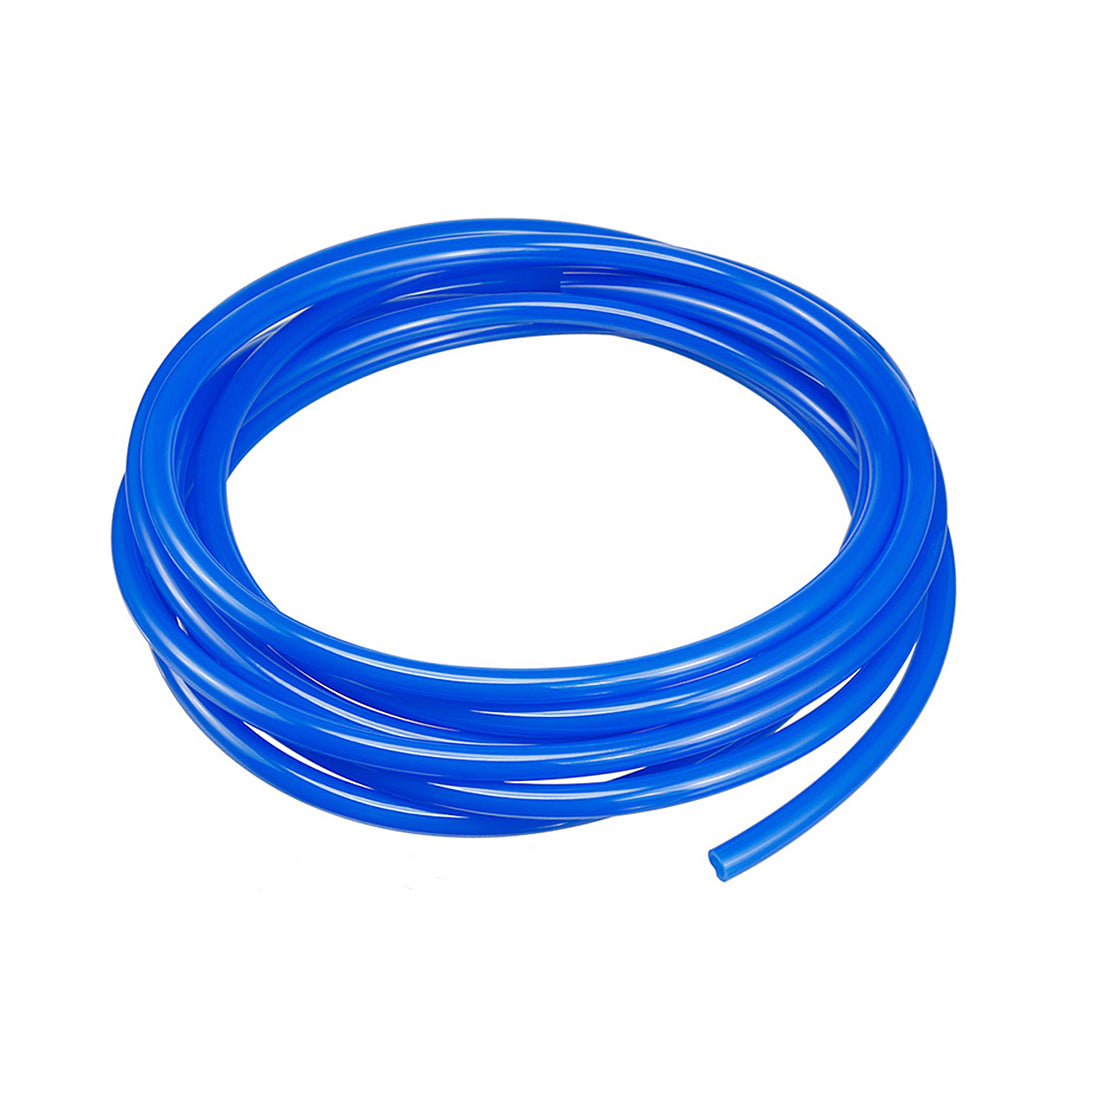 uxcell Uxcell 8mm X 5mm Pneumatic Air PU Hose Pipe Tube 5 Meter 16.4ft Blue